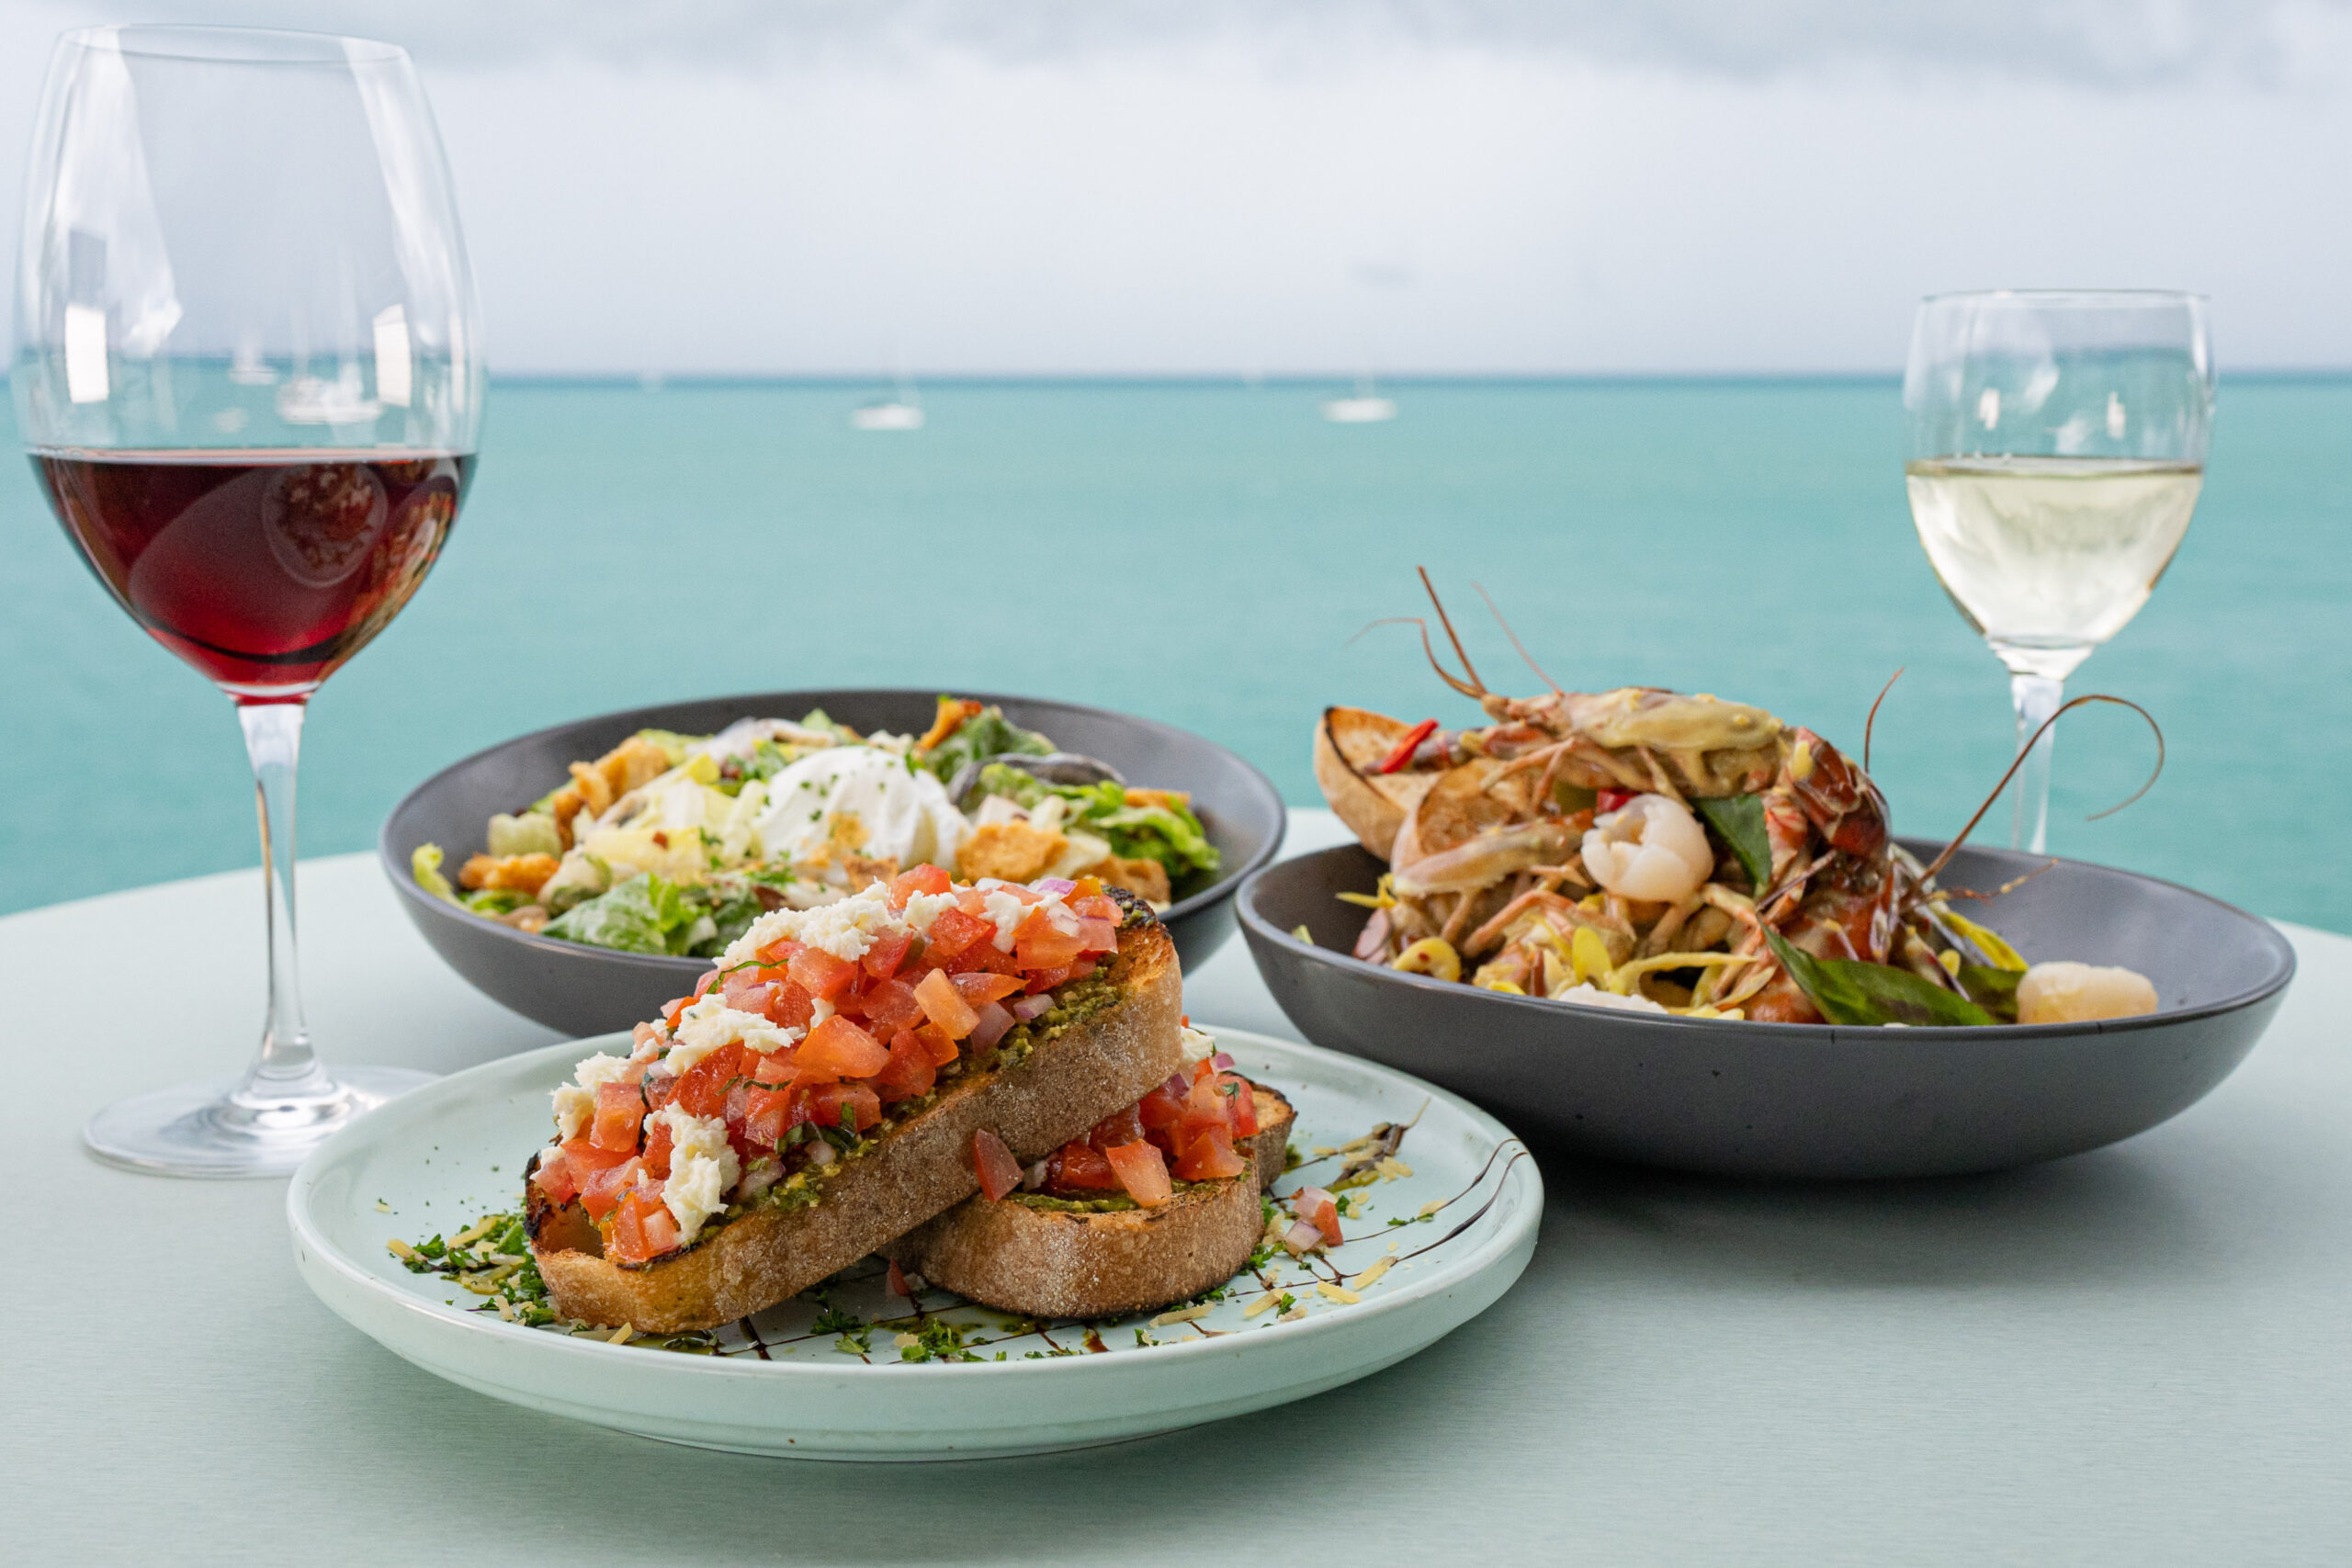 3 dishes and 2 glasses of wine on a table with an ocean view